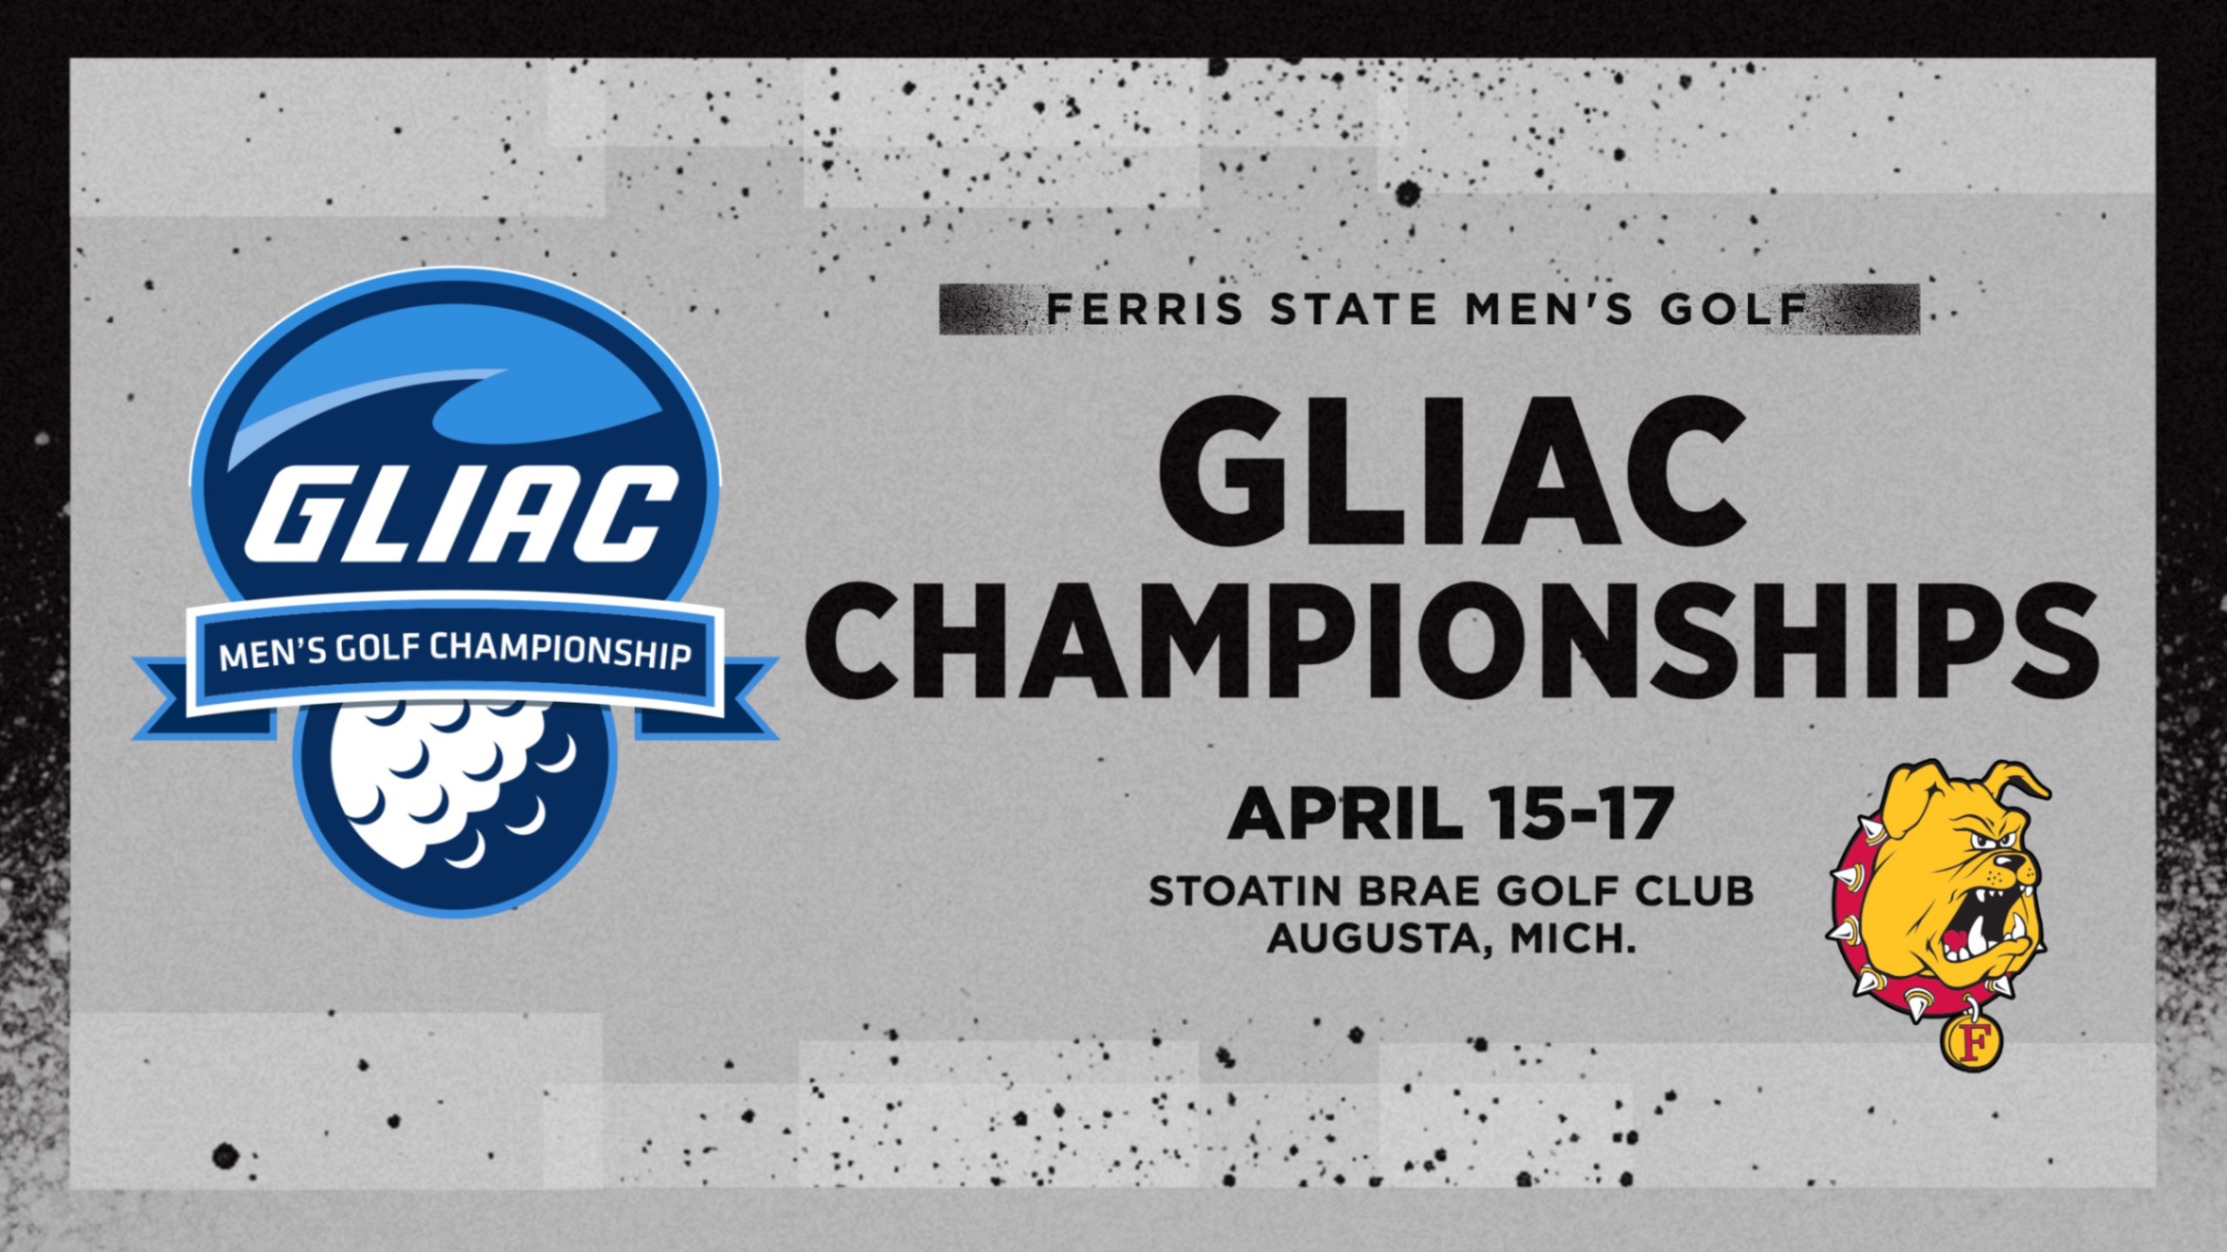 Ferris State Men's Golf Competes In GLIAC Championships This Weekend